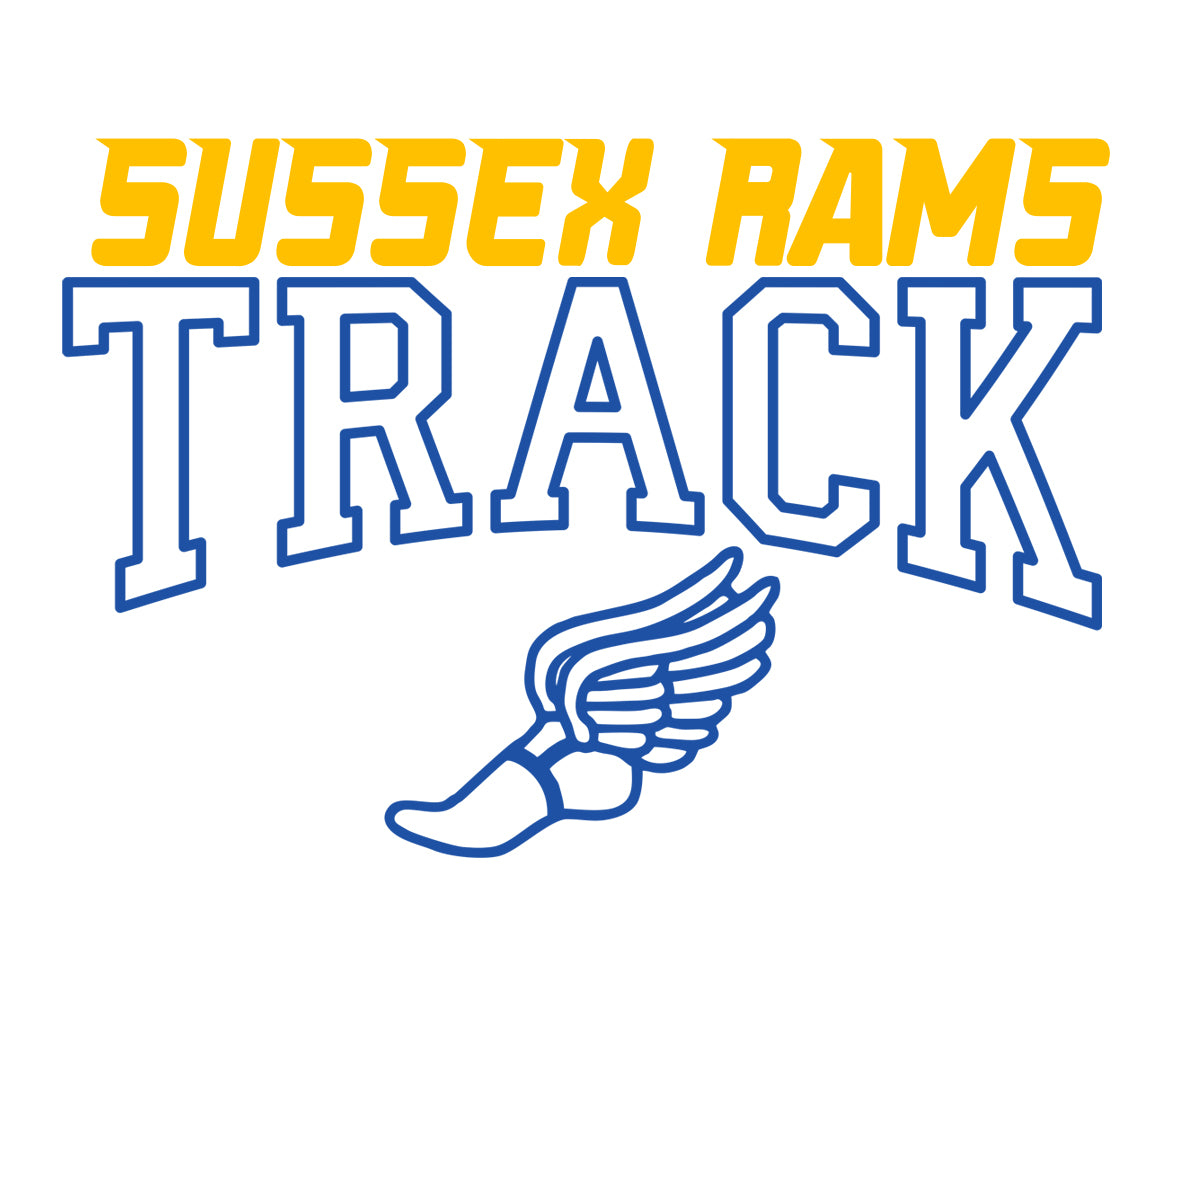 Sussex Rams Track and Field